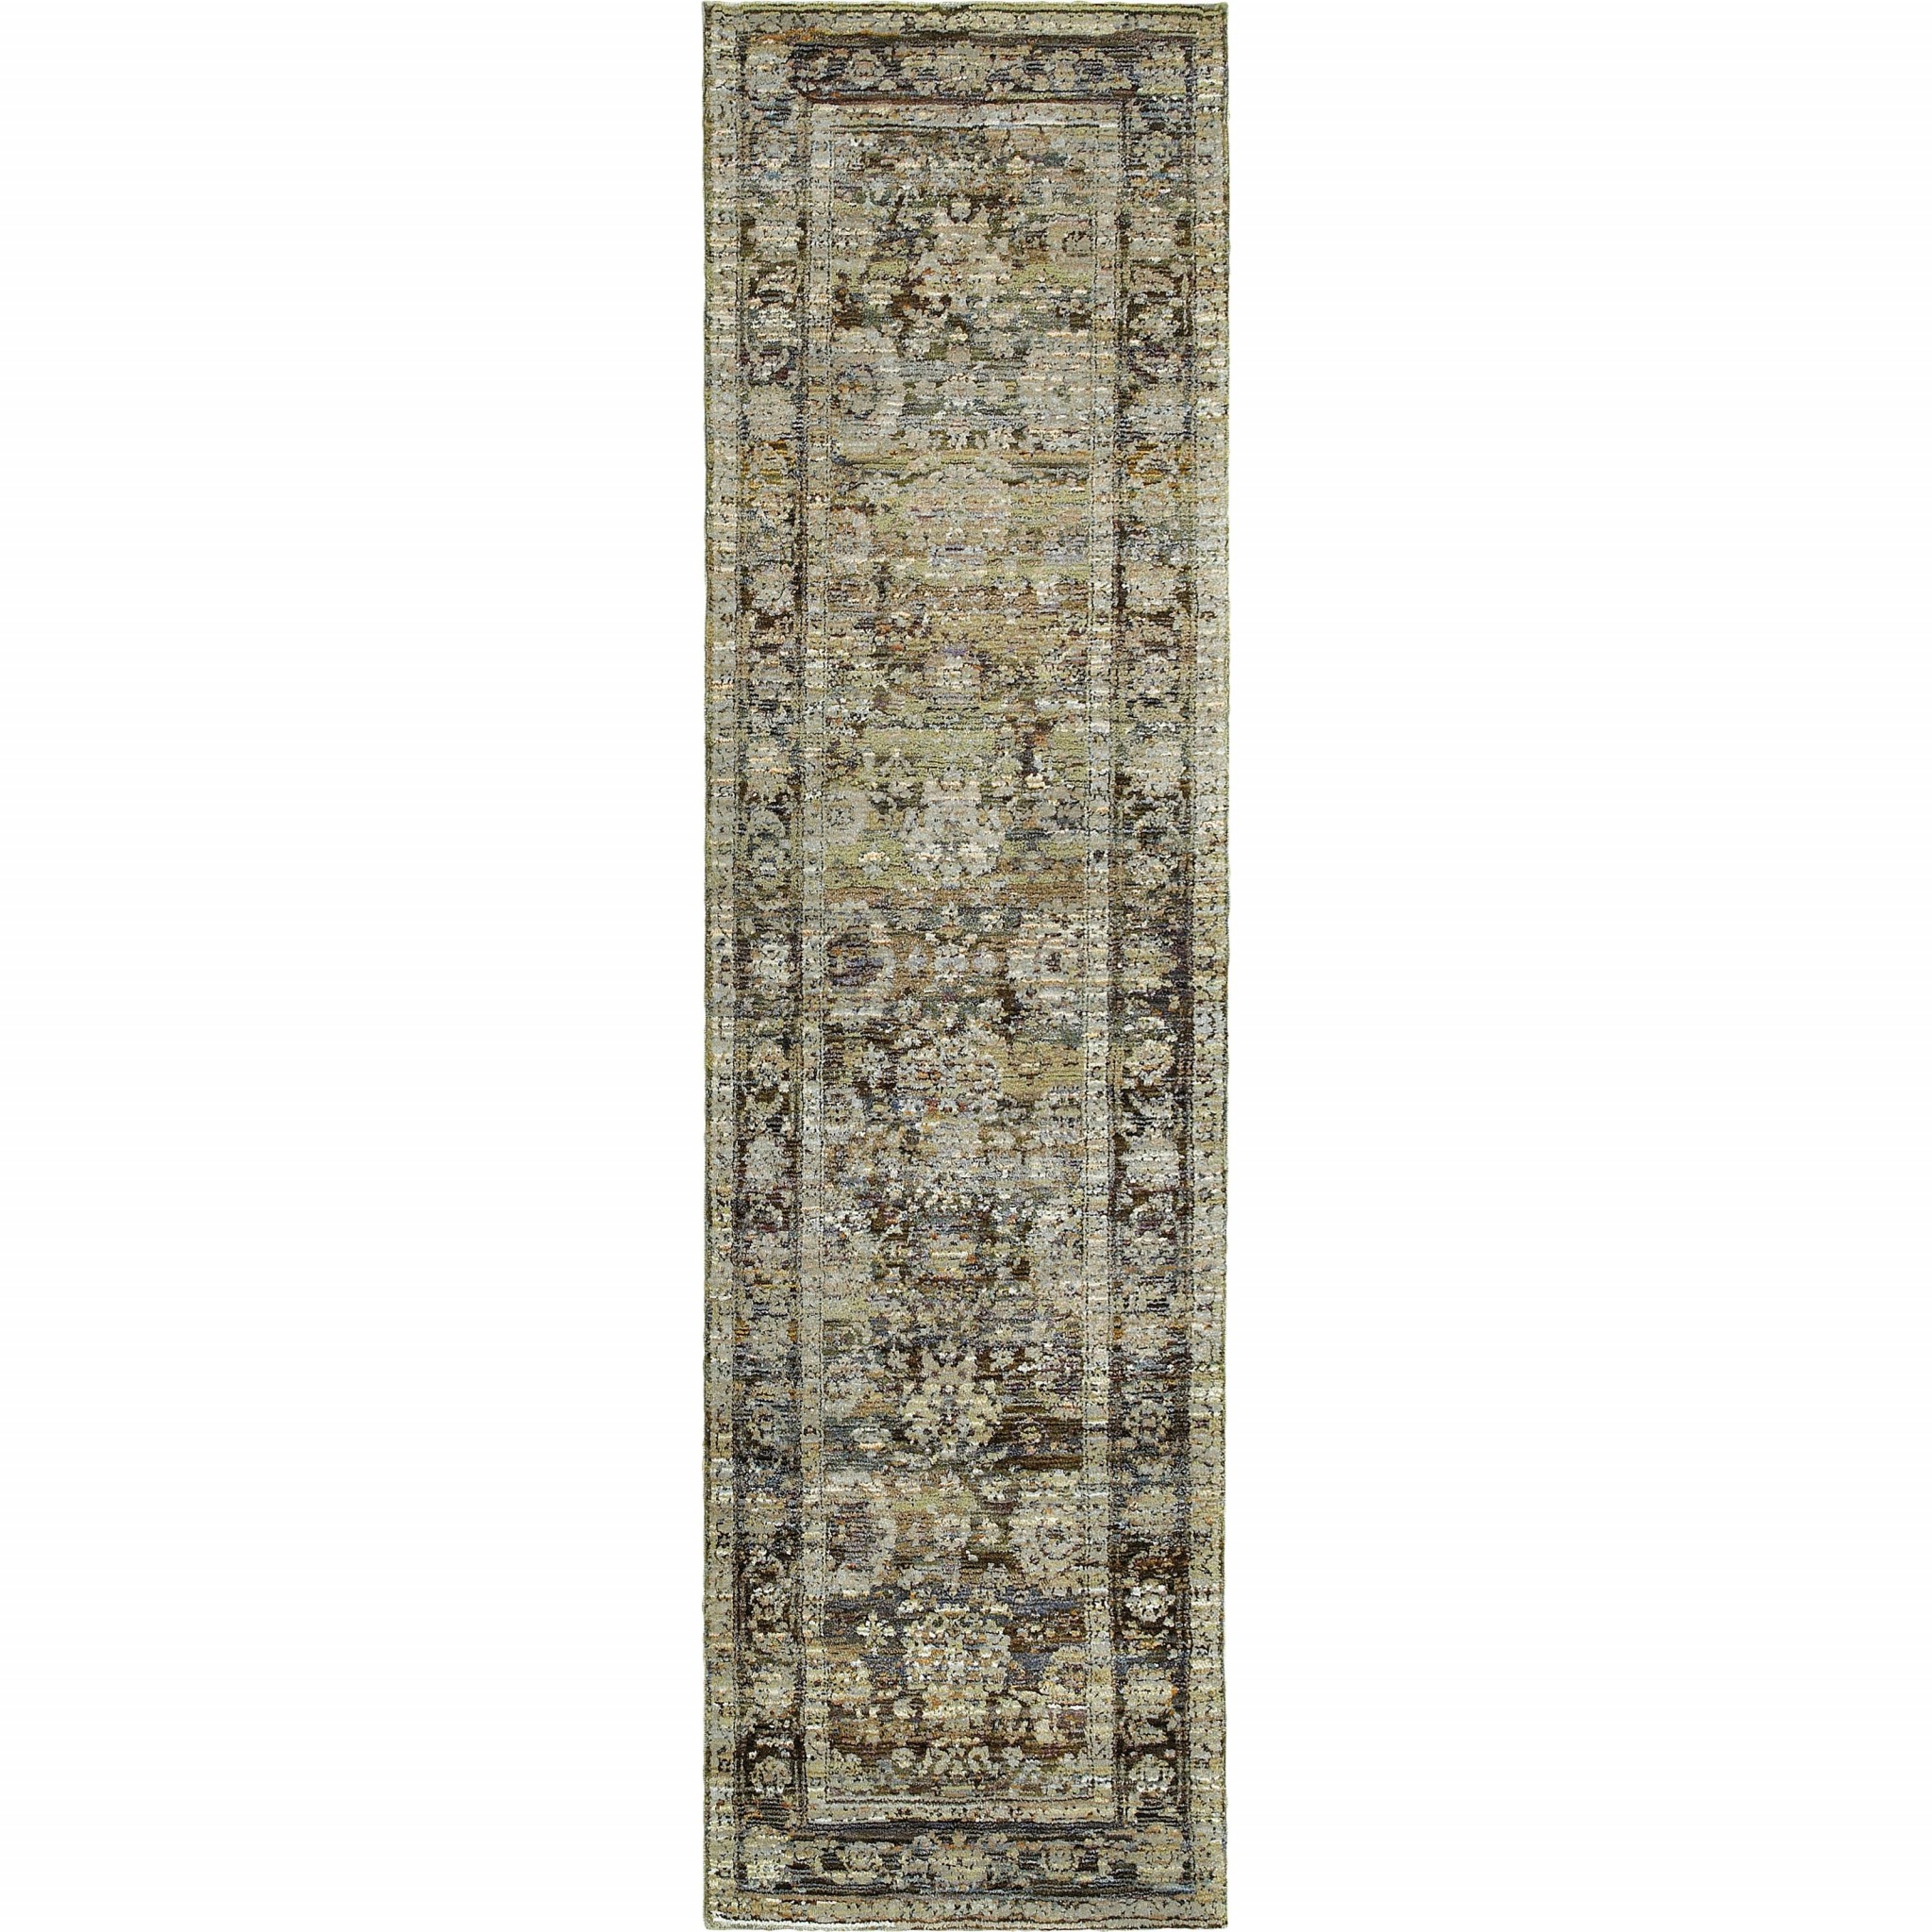 2'X8' Green And Brown Floral Runner Rug-383646-1